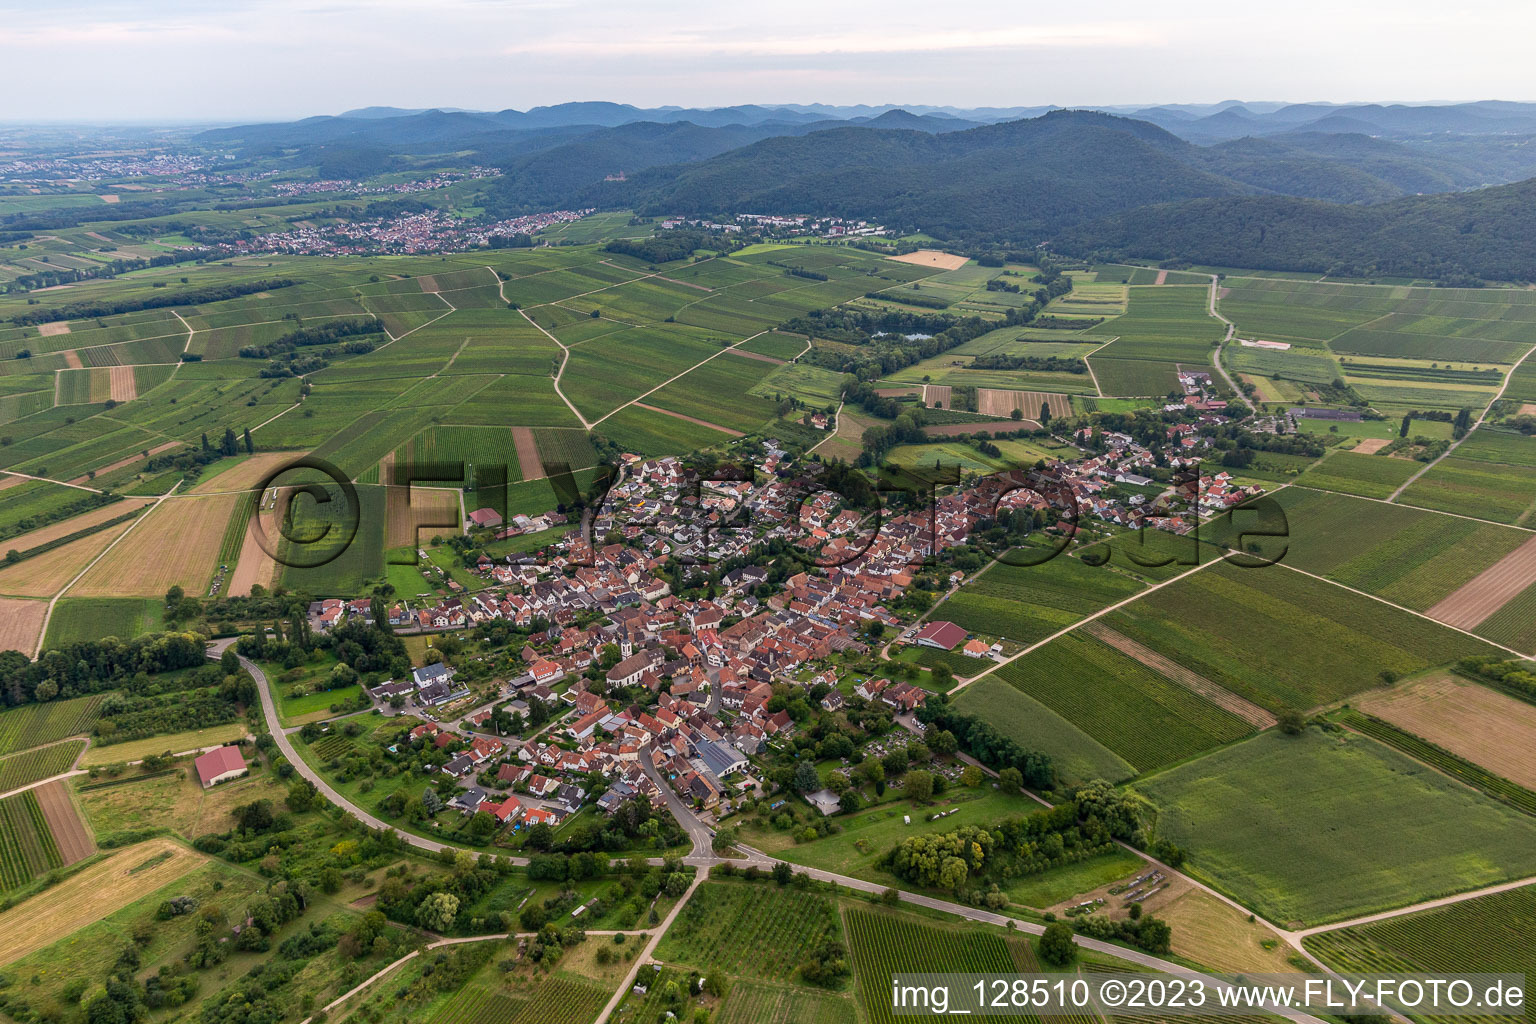 Agricultural land and field borders surround the settlement area of the village in Goecklingen in the state Rhineland-Palatinate, Germany seen from a drone